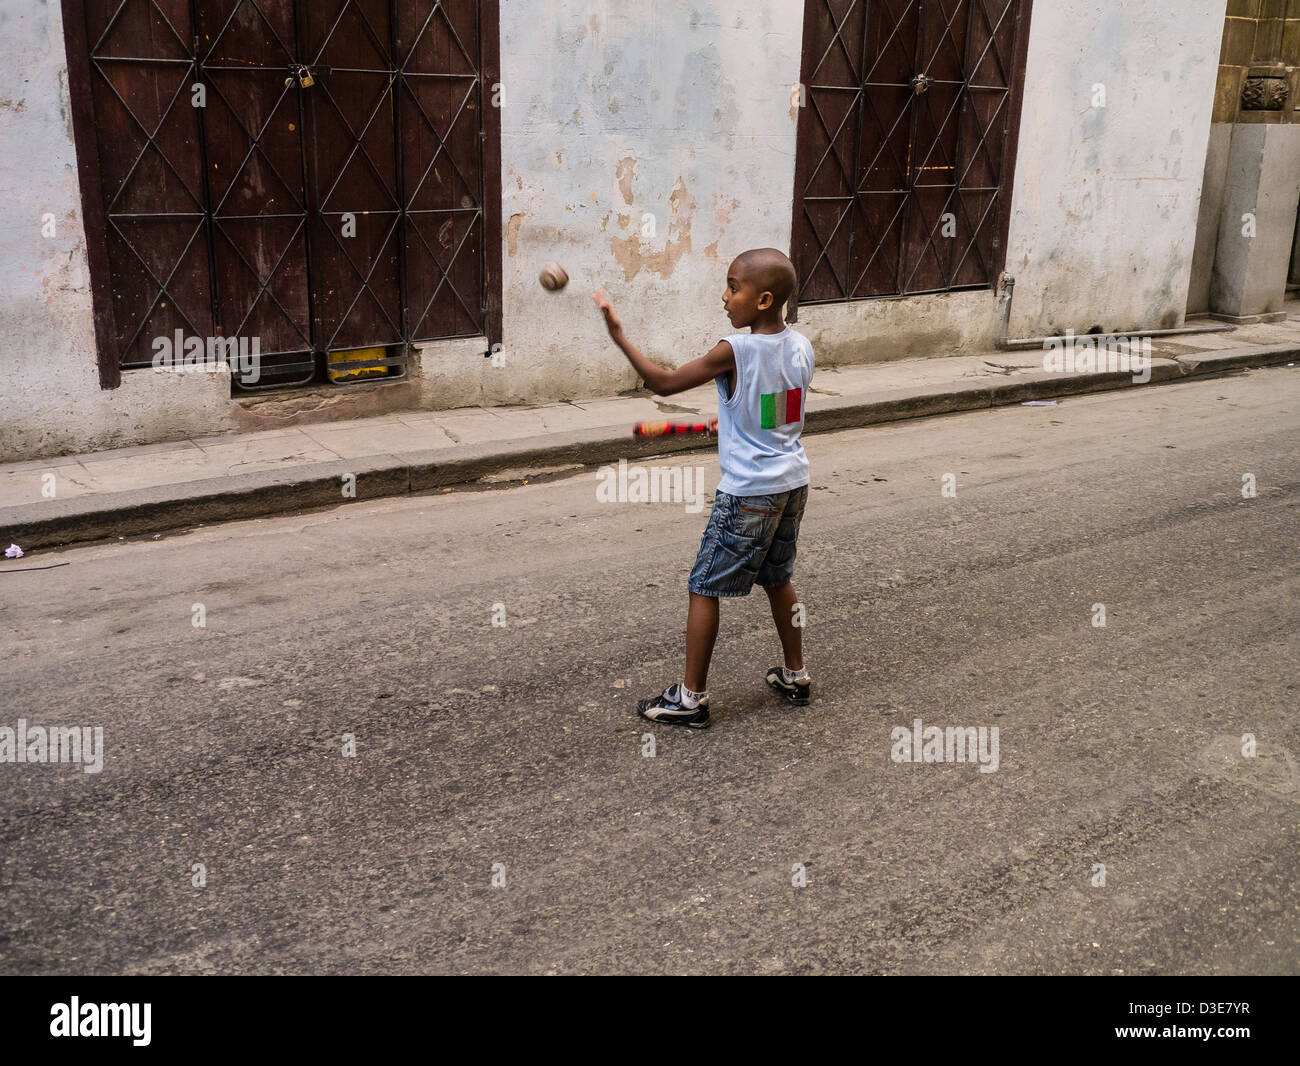 A young Cuban boy throws a baseball in the air as he starts his swing to hit it as he plays in the in the middle of the street. Stock Photo